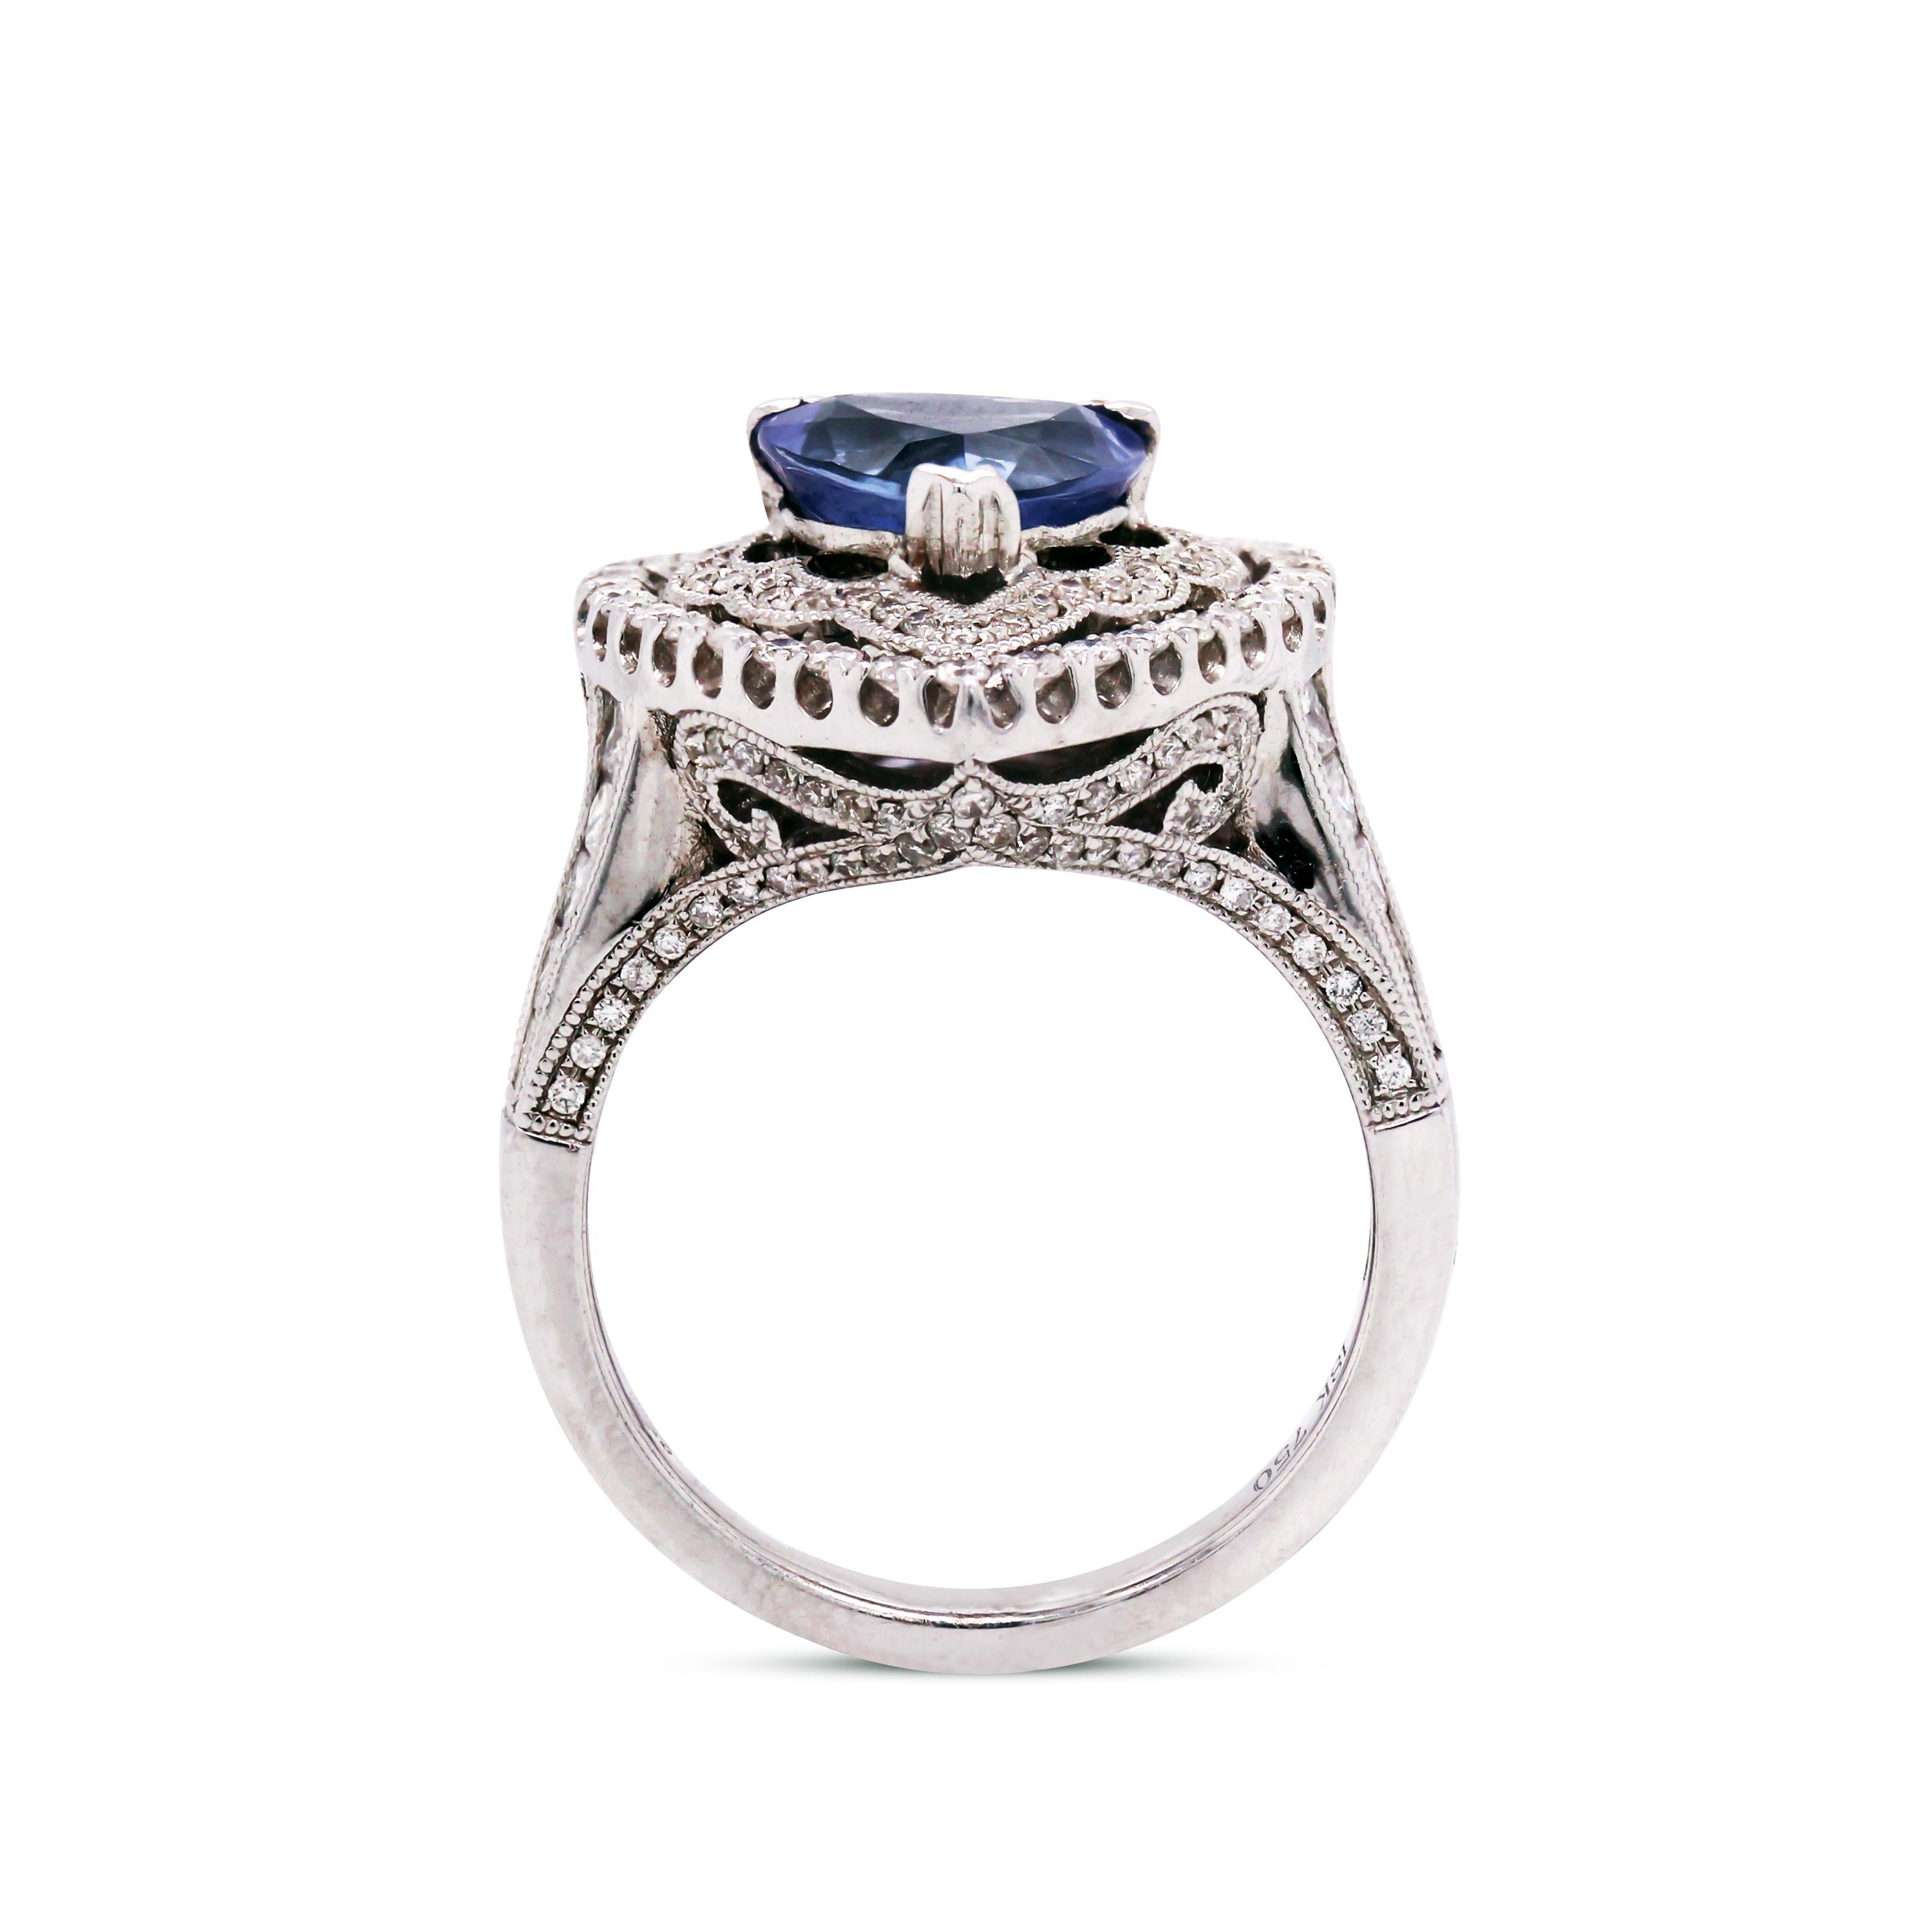 Trillion Cut 18 Karat White Gold and Diamond Heart Shape Cocktail Ring with Tanzanite Center